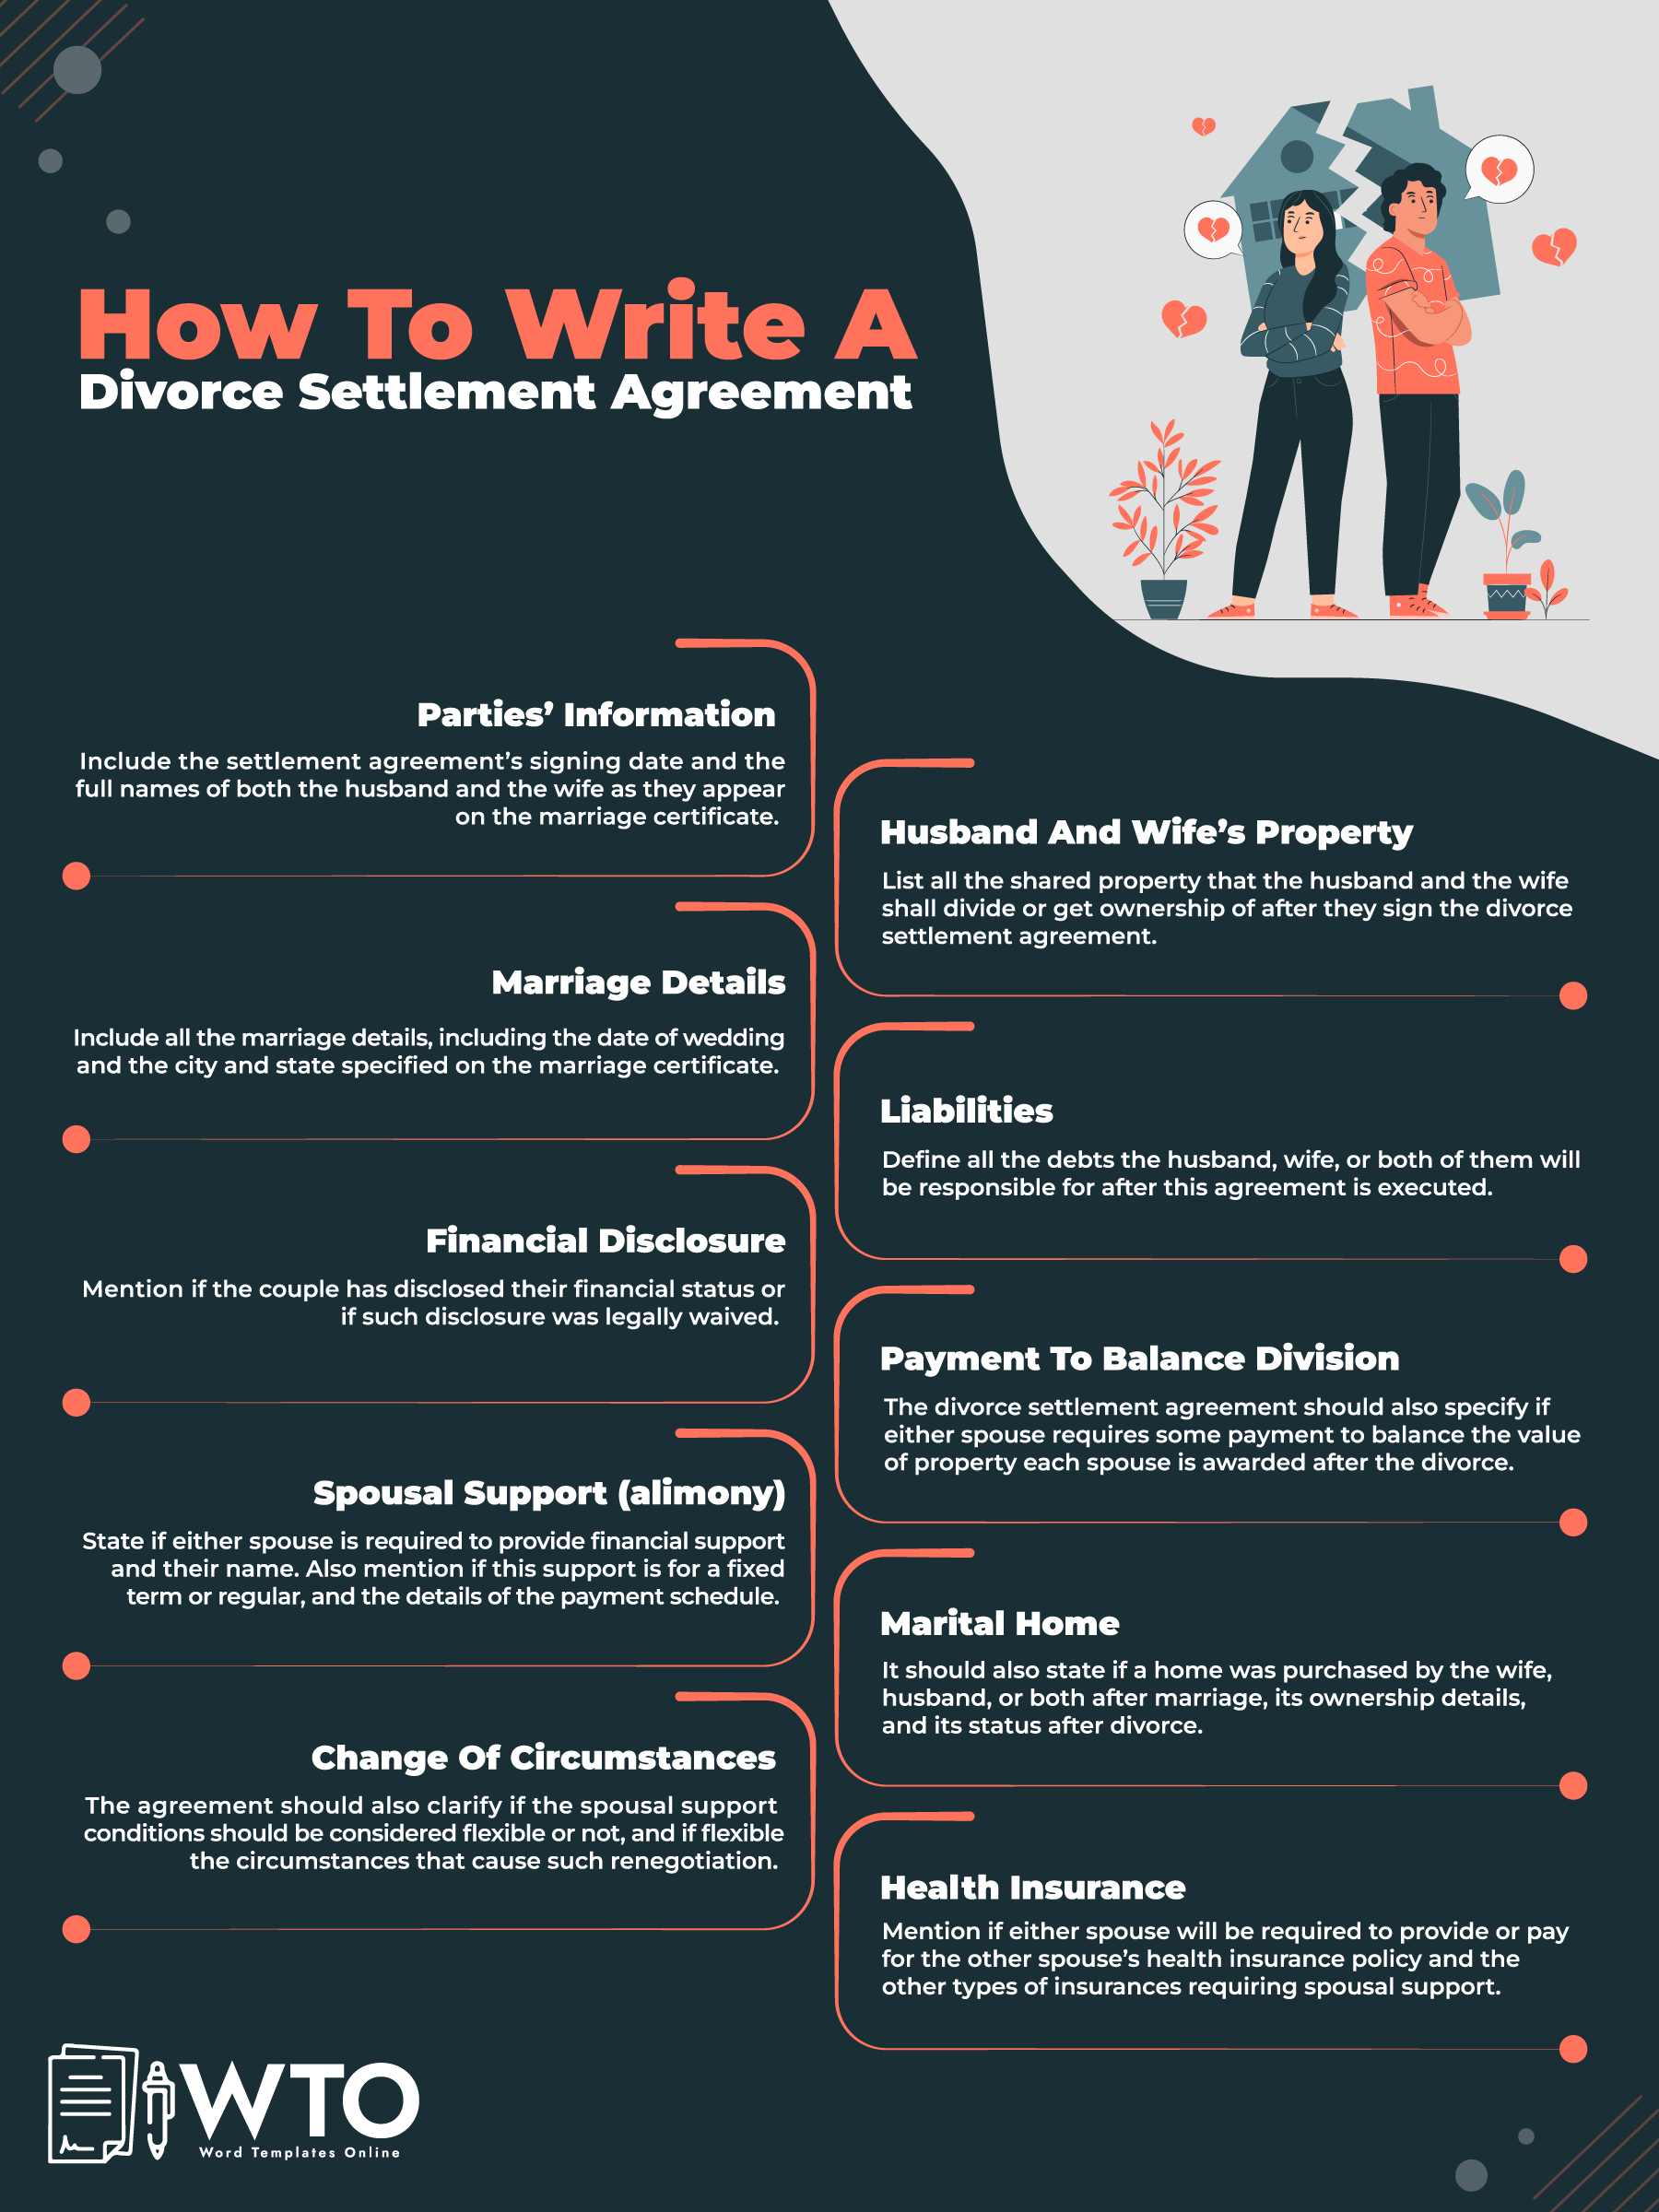 This infographic is about the writing of a Divorce Settlement Agreement.